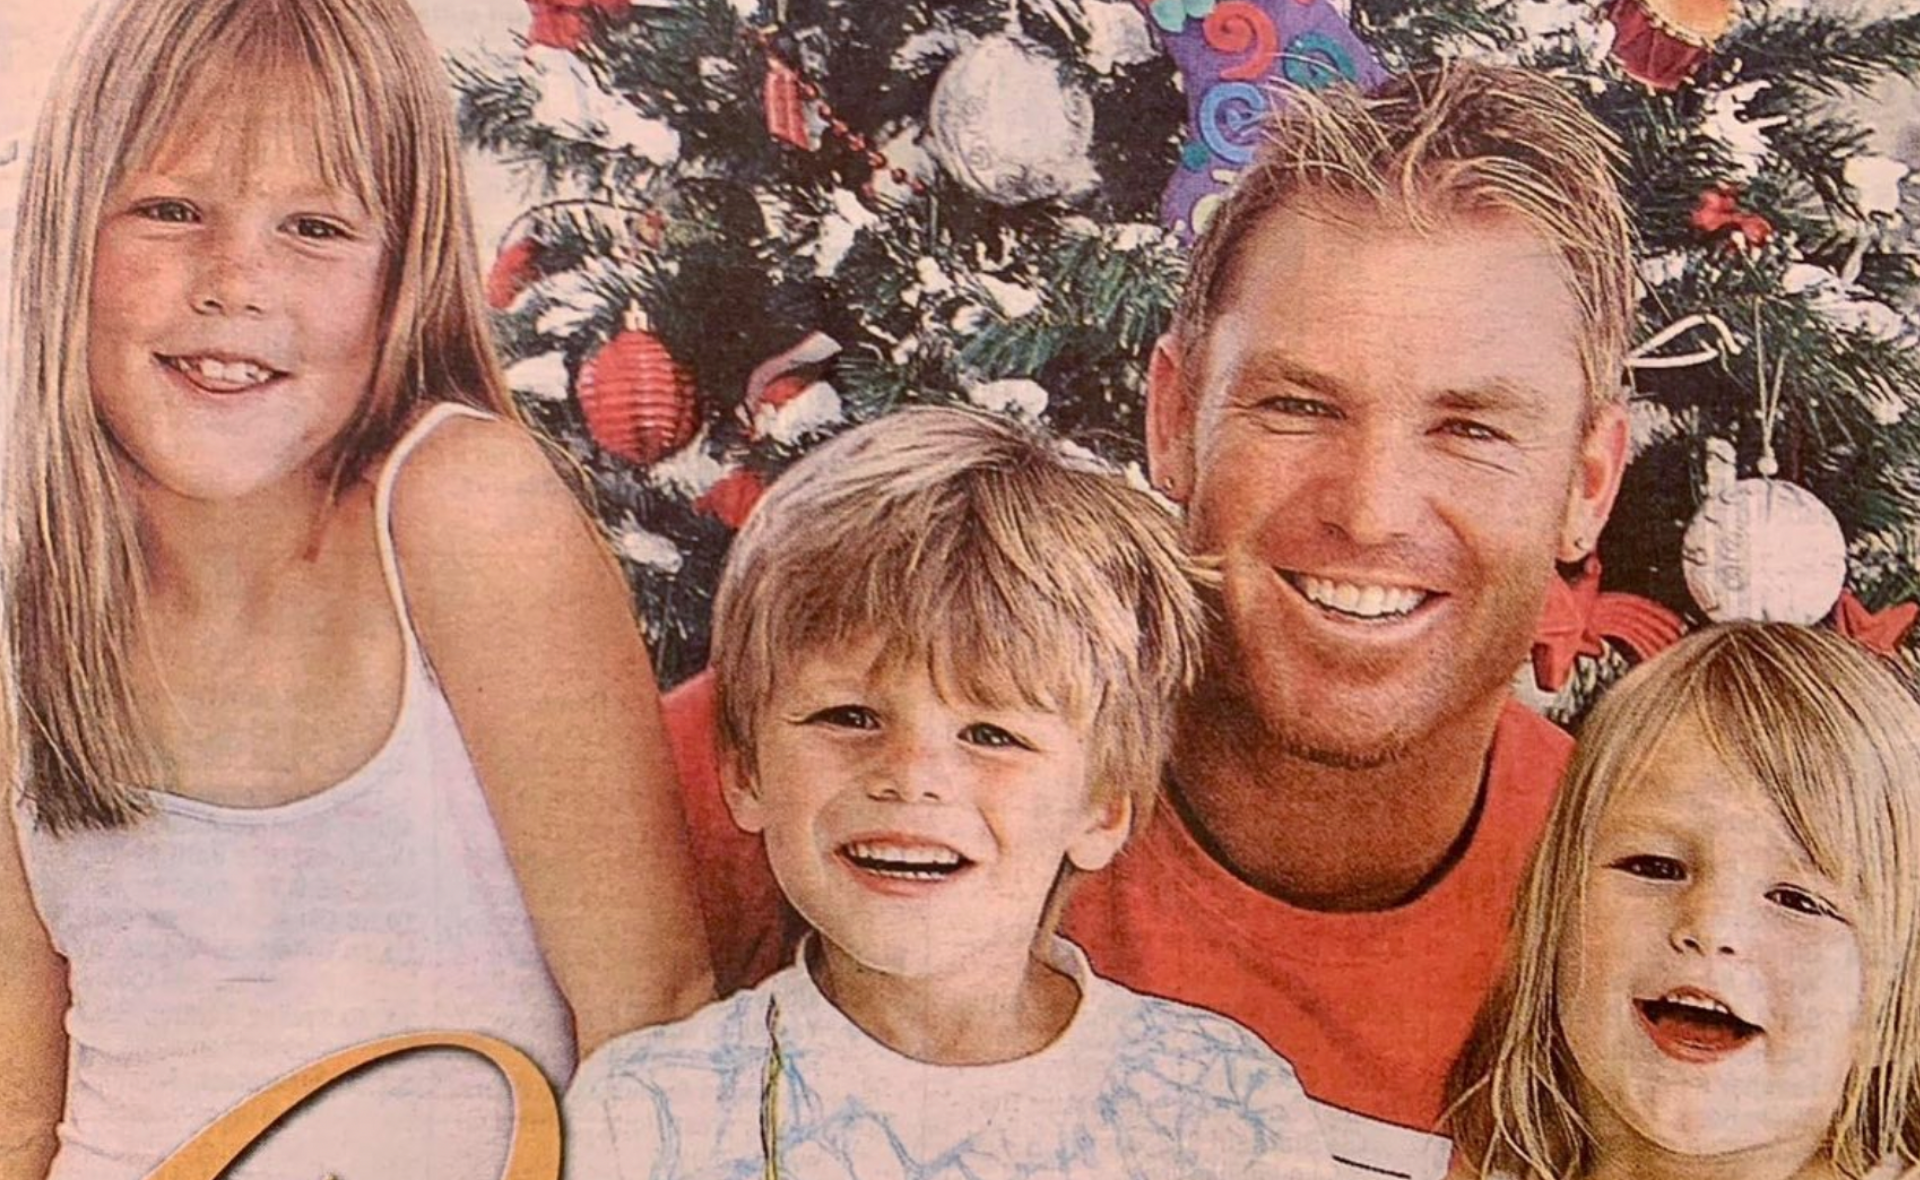 Shane Warne’s children continue to honour their father in the years following his passing